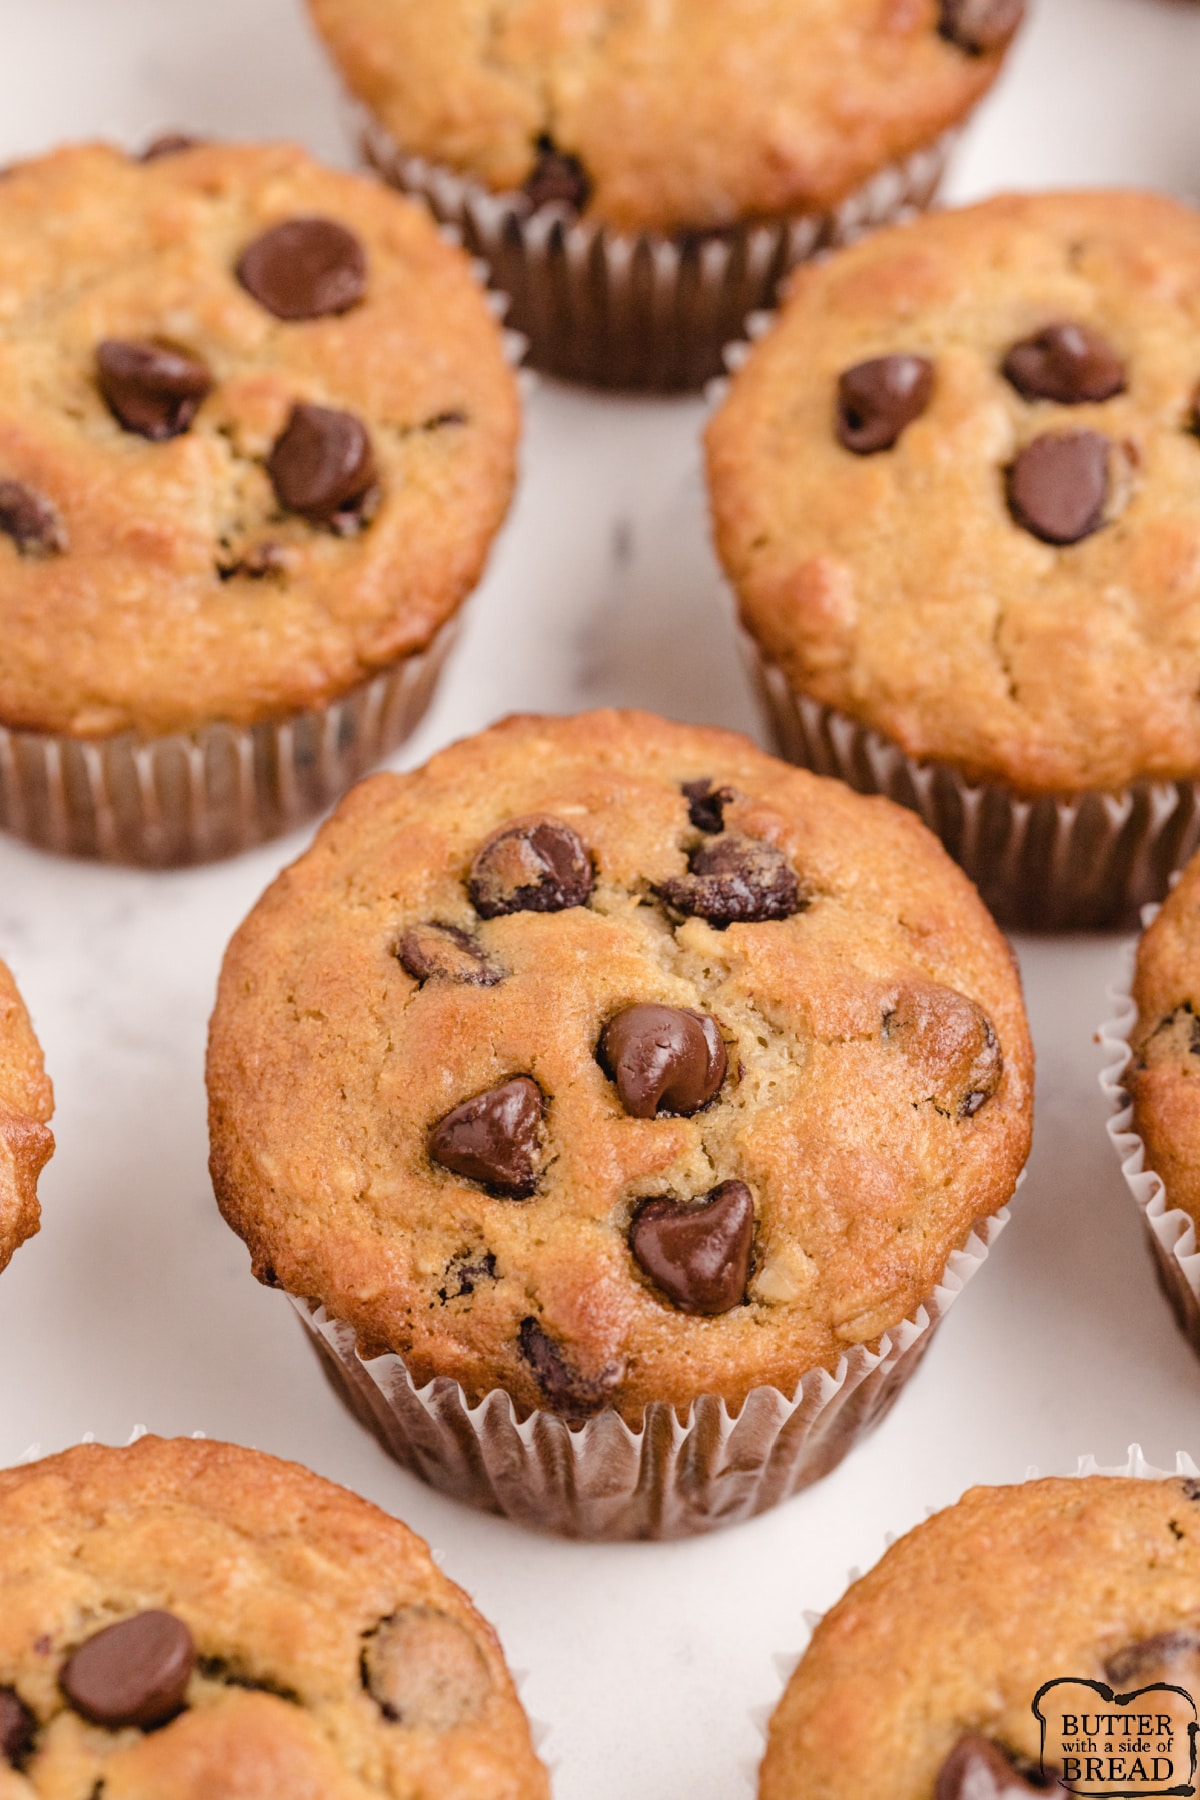 Oatmeal muffins with chocolate chips